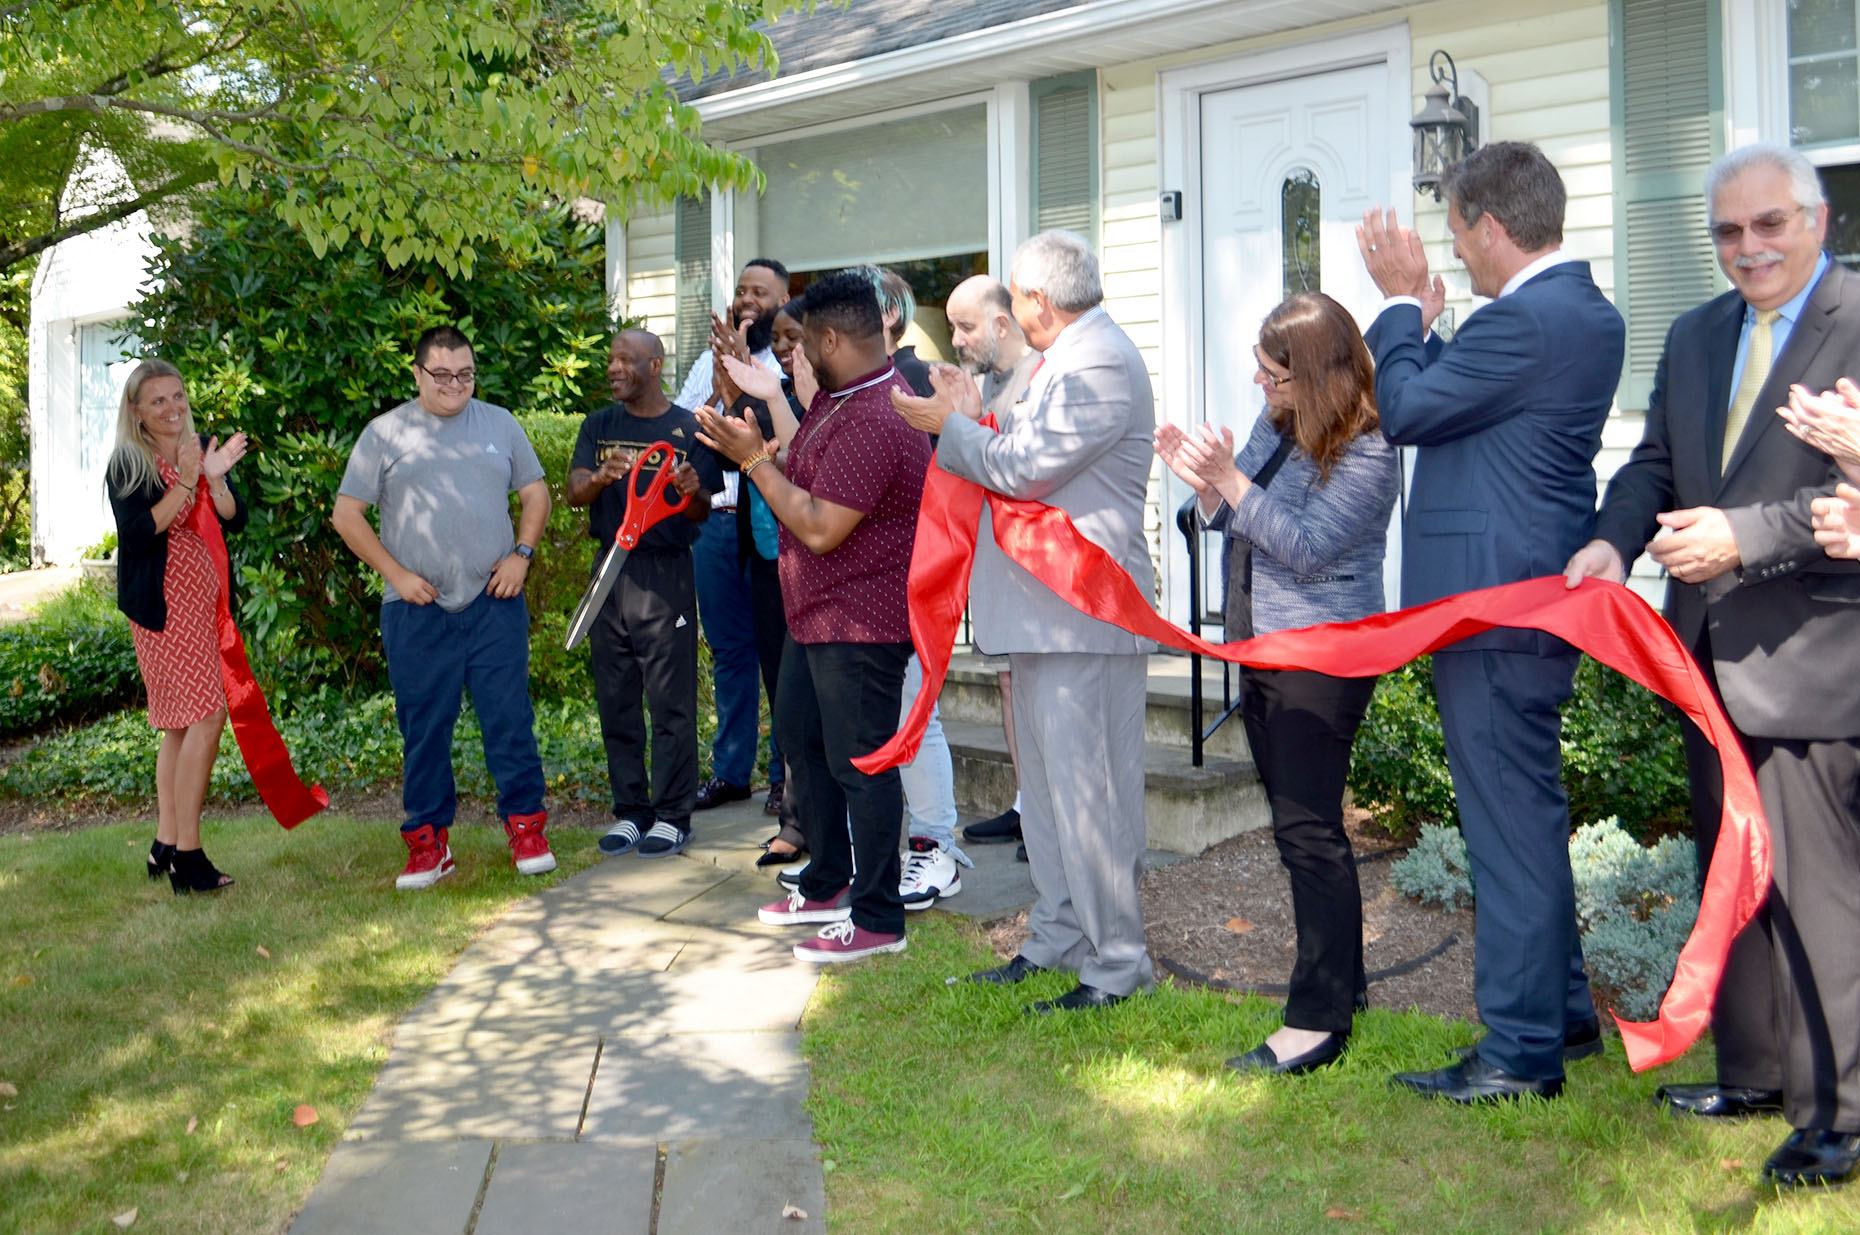 Community Options, Inc. of Mercer County celebrated the grand opening of a new home in Princeton, NJ with a ribbon cutting ceremony at 11 a.m.. Senator Kip Bateman, Assemblyman Andrew Zwicker, Mayor Liz Lempert and members of the Princeton Council as well as Board Members- Phyllis L. Marchand, Phil Lian, James Spano, were in attendance.